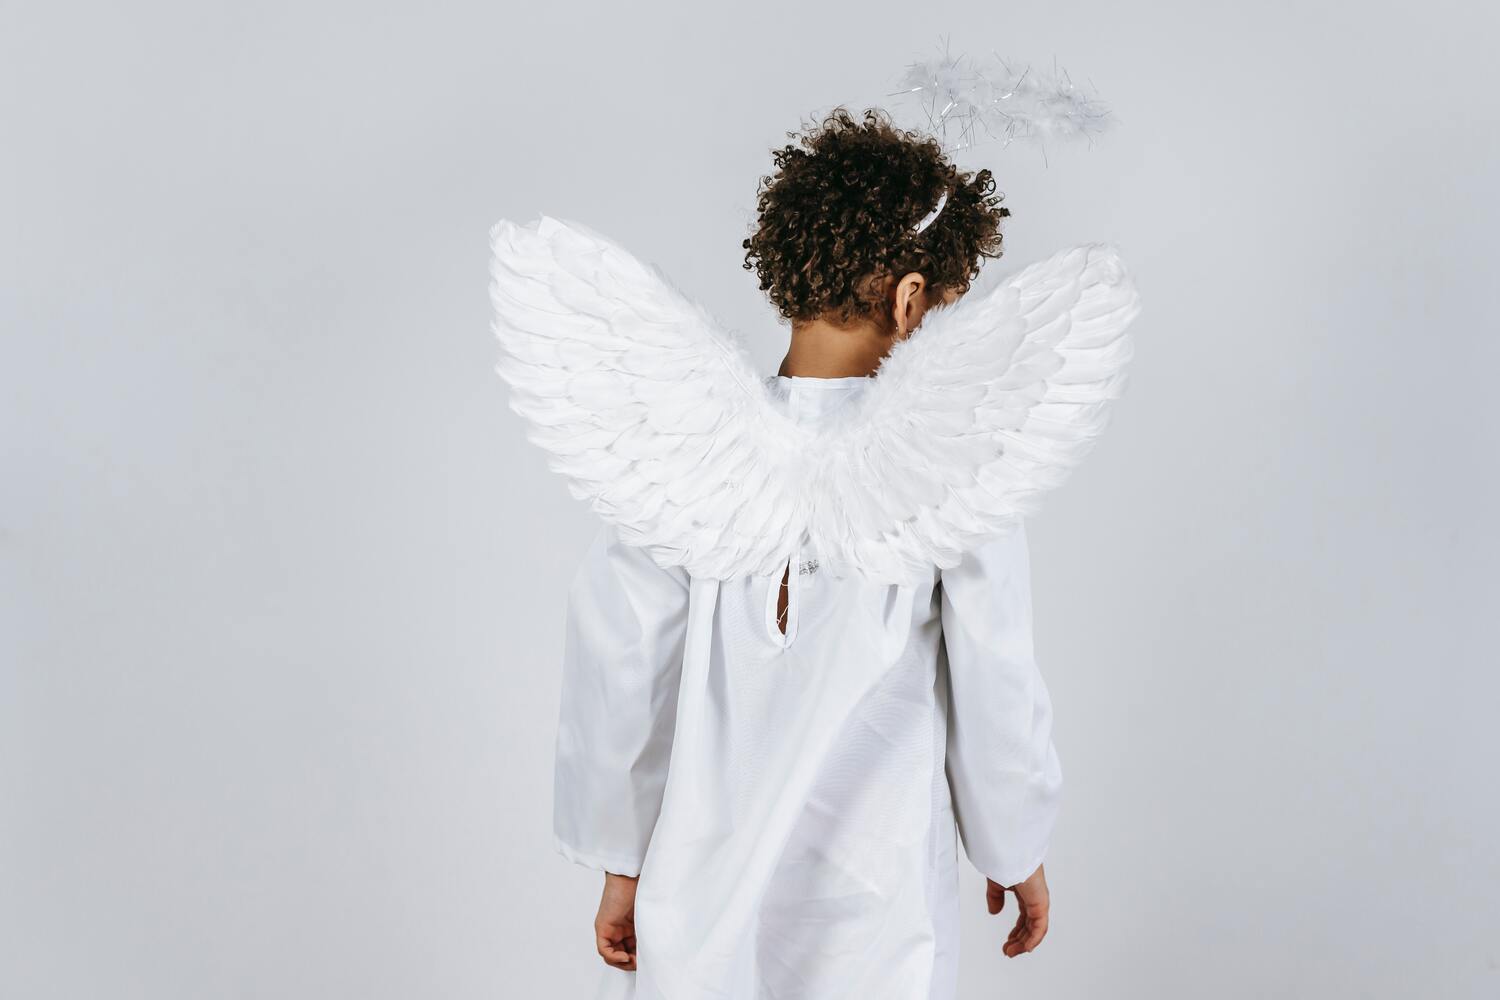 Seeing the Angel Number 777 Often? Here's What It Might Mean